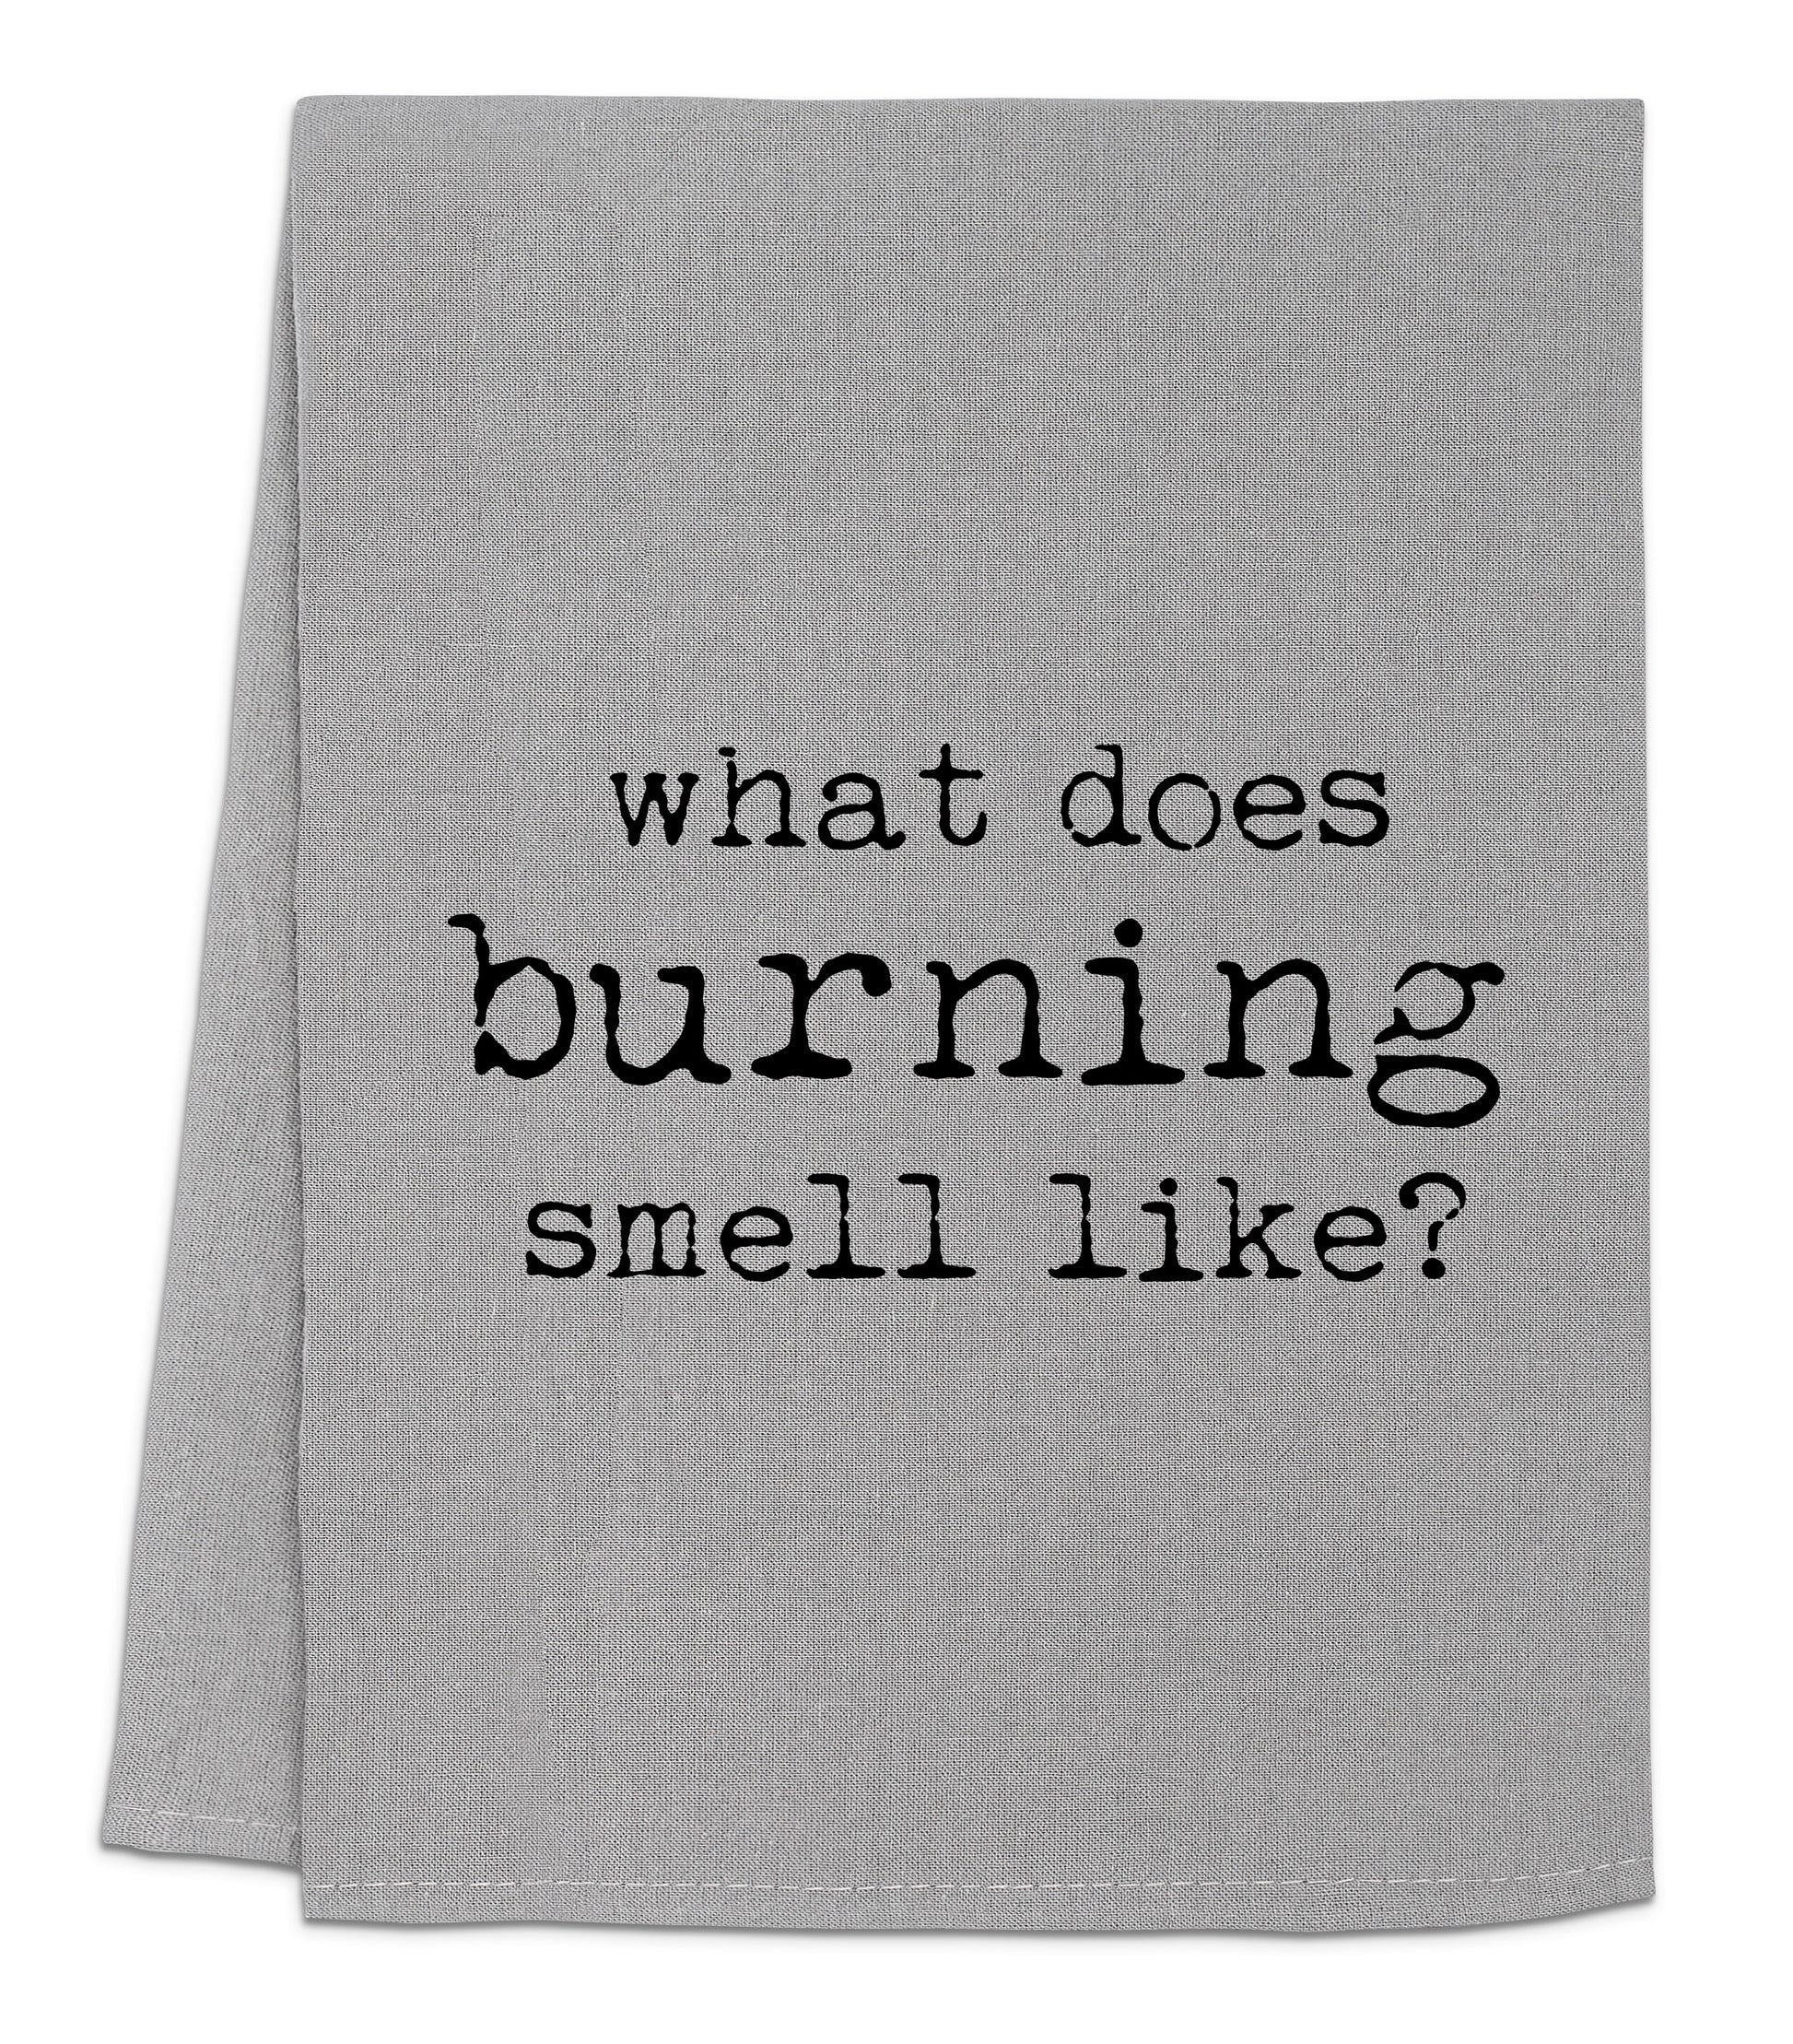 a towel that says what does burning smell like?